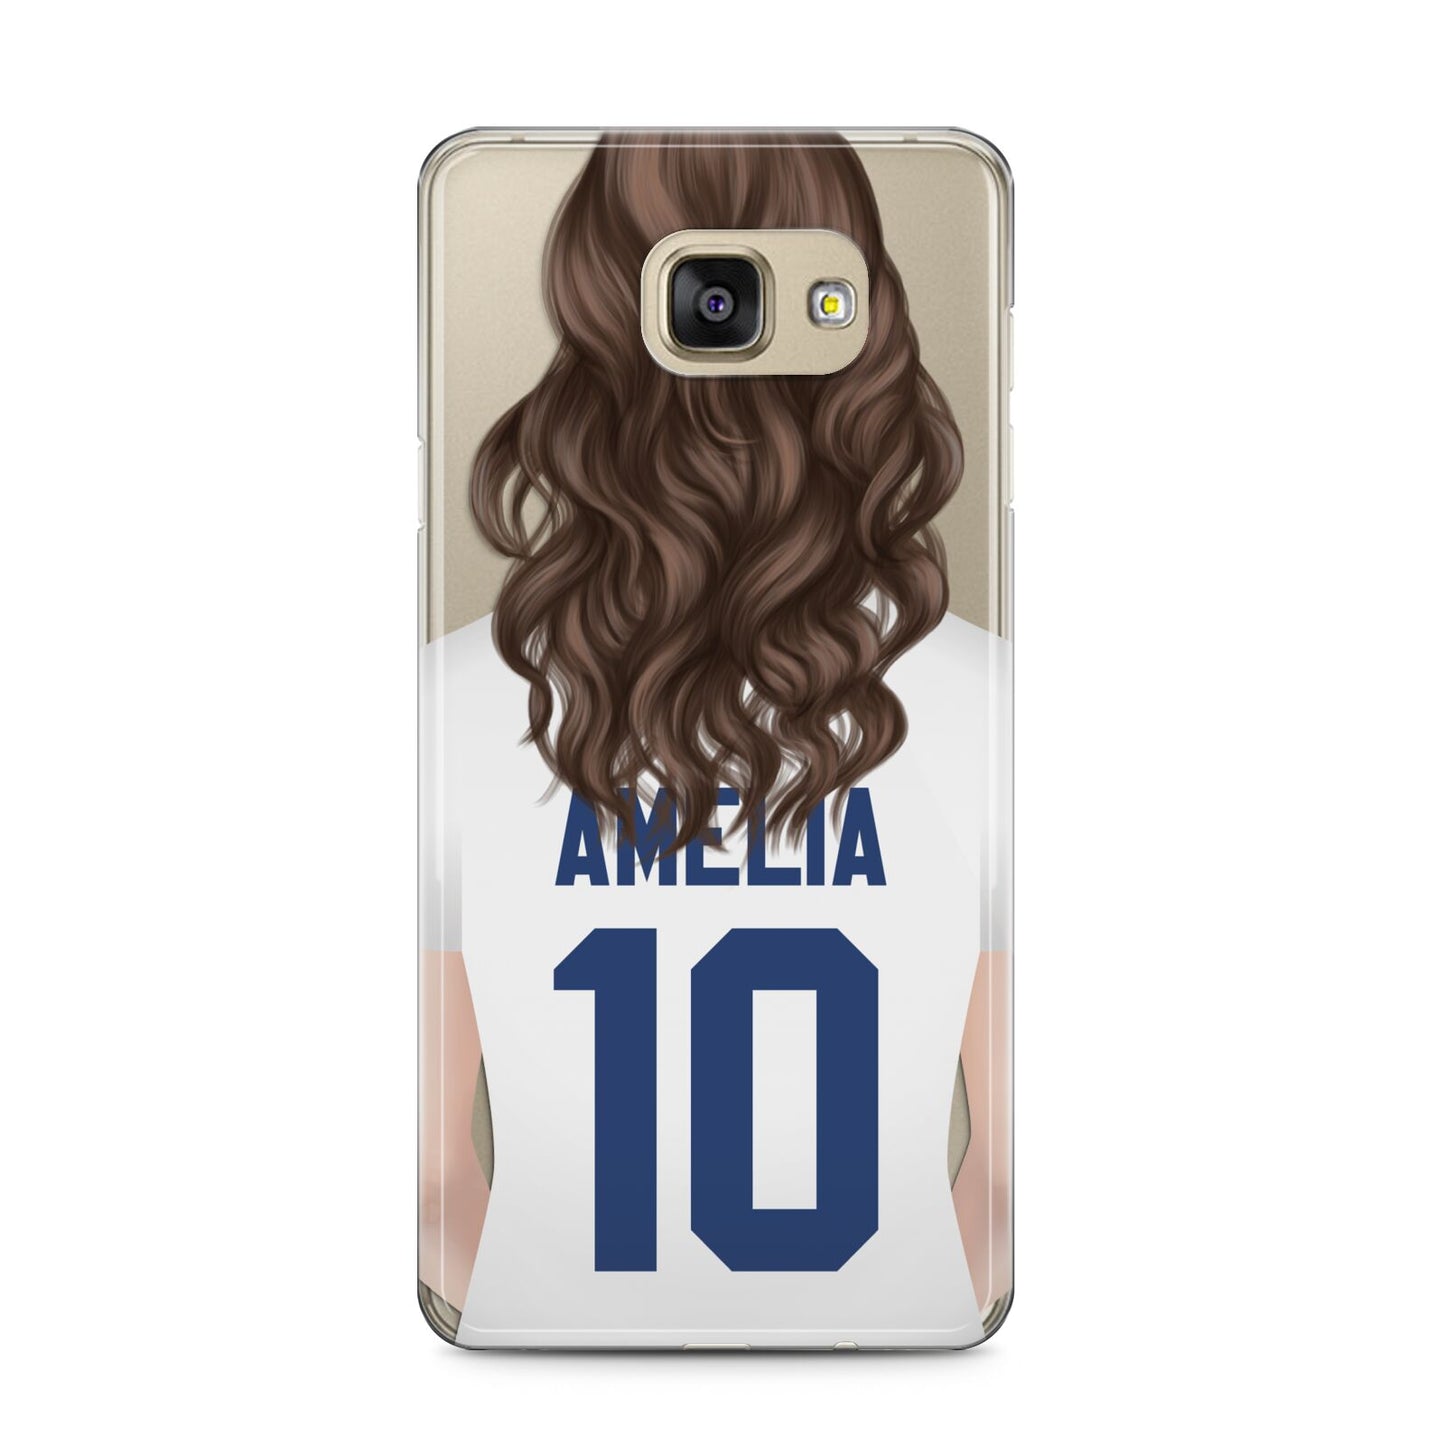 Womens Footballer Personalised Samsung Galaxy A5 2016 Case on gold phone